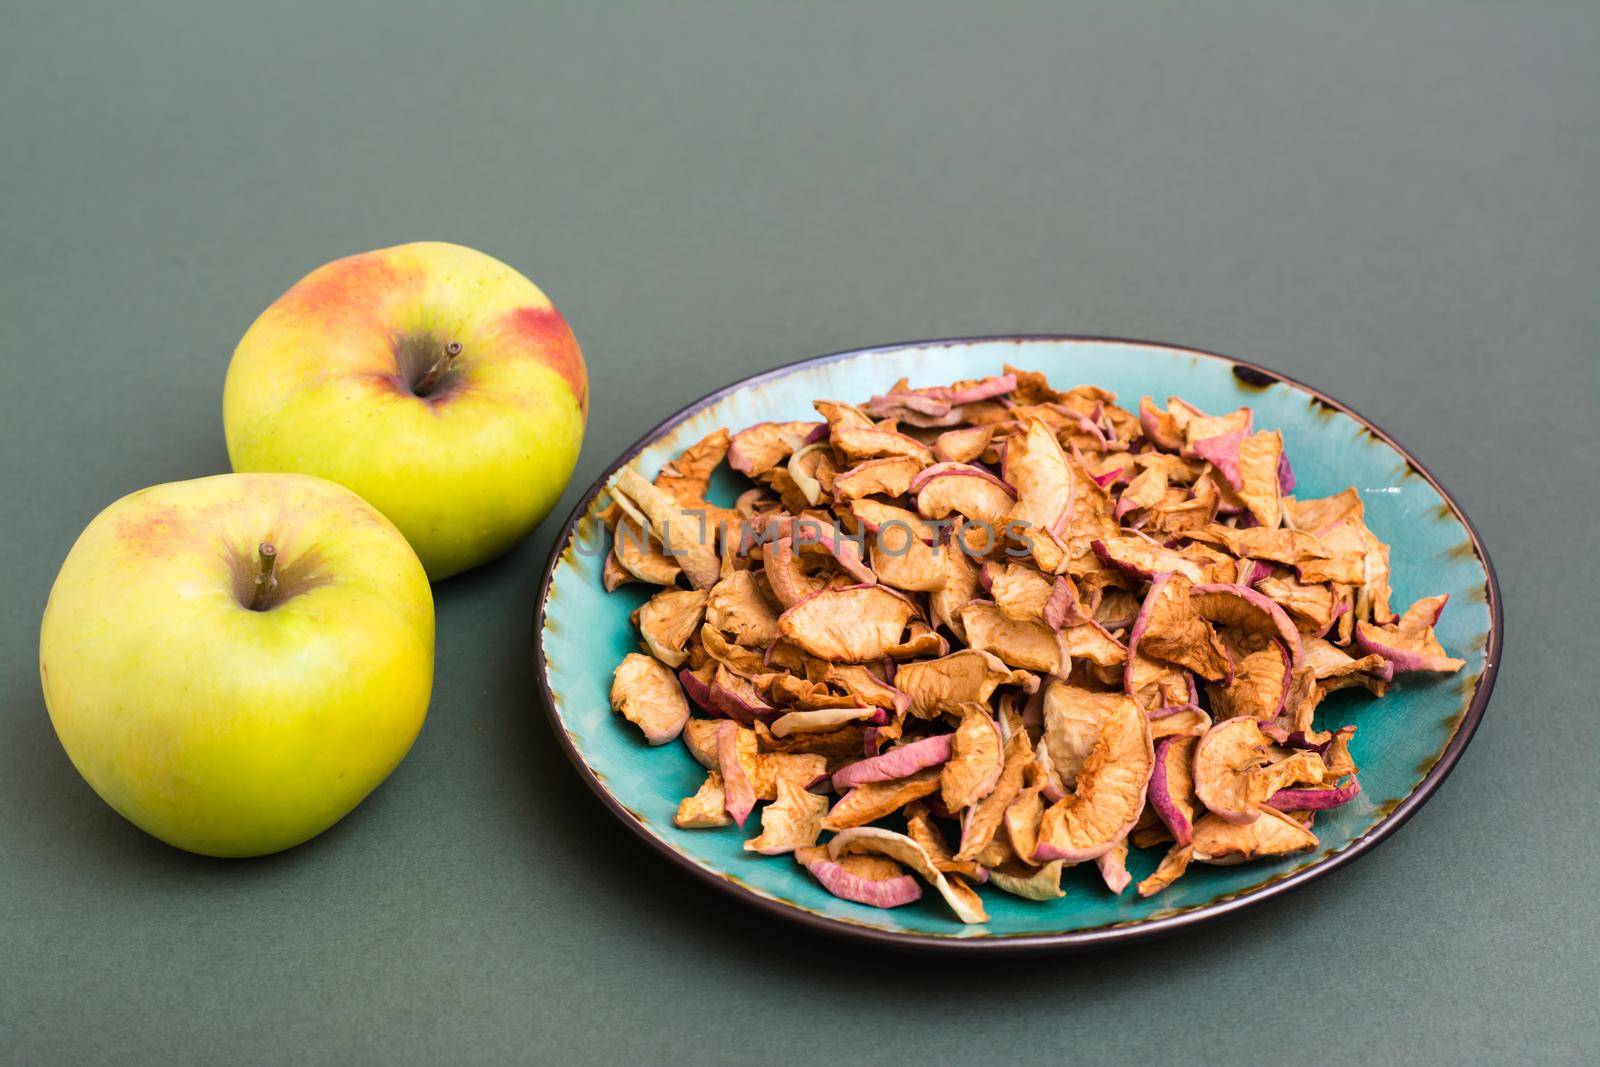 Slices of dry apples on a plate and fresh apples on a green background. Healthy eating